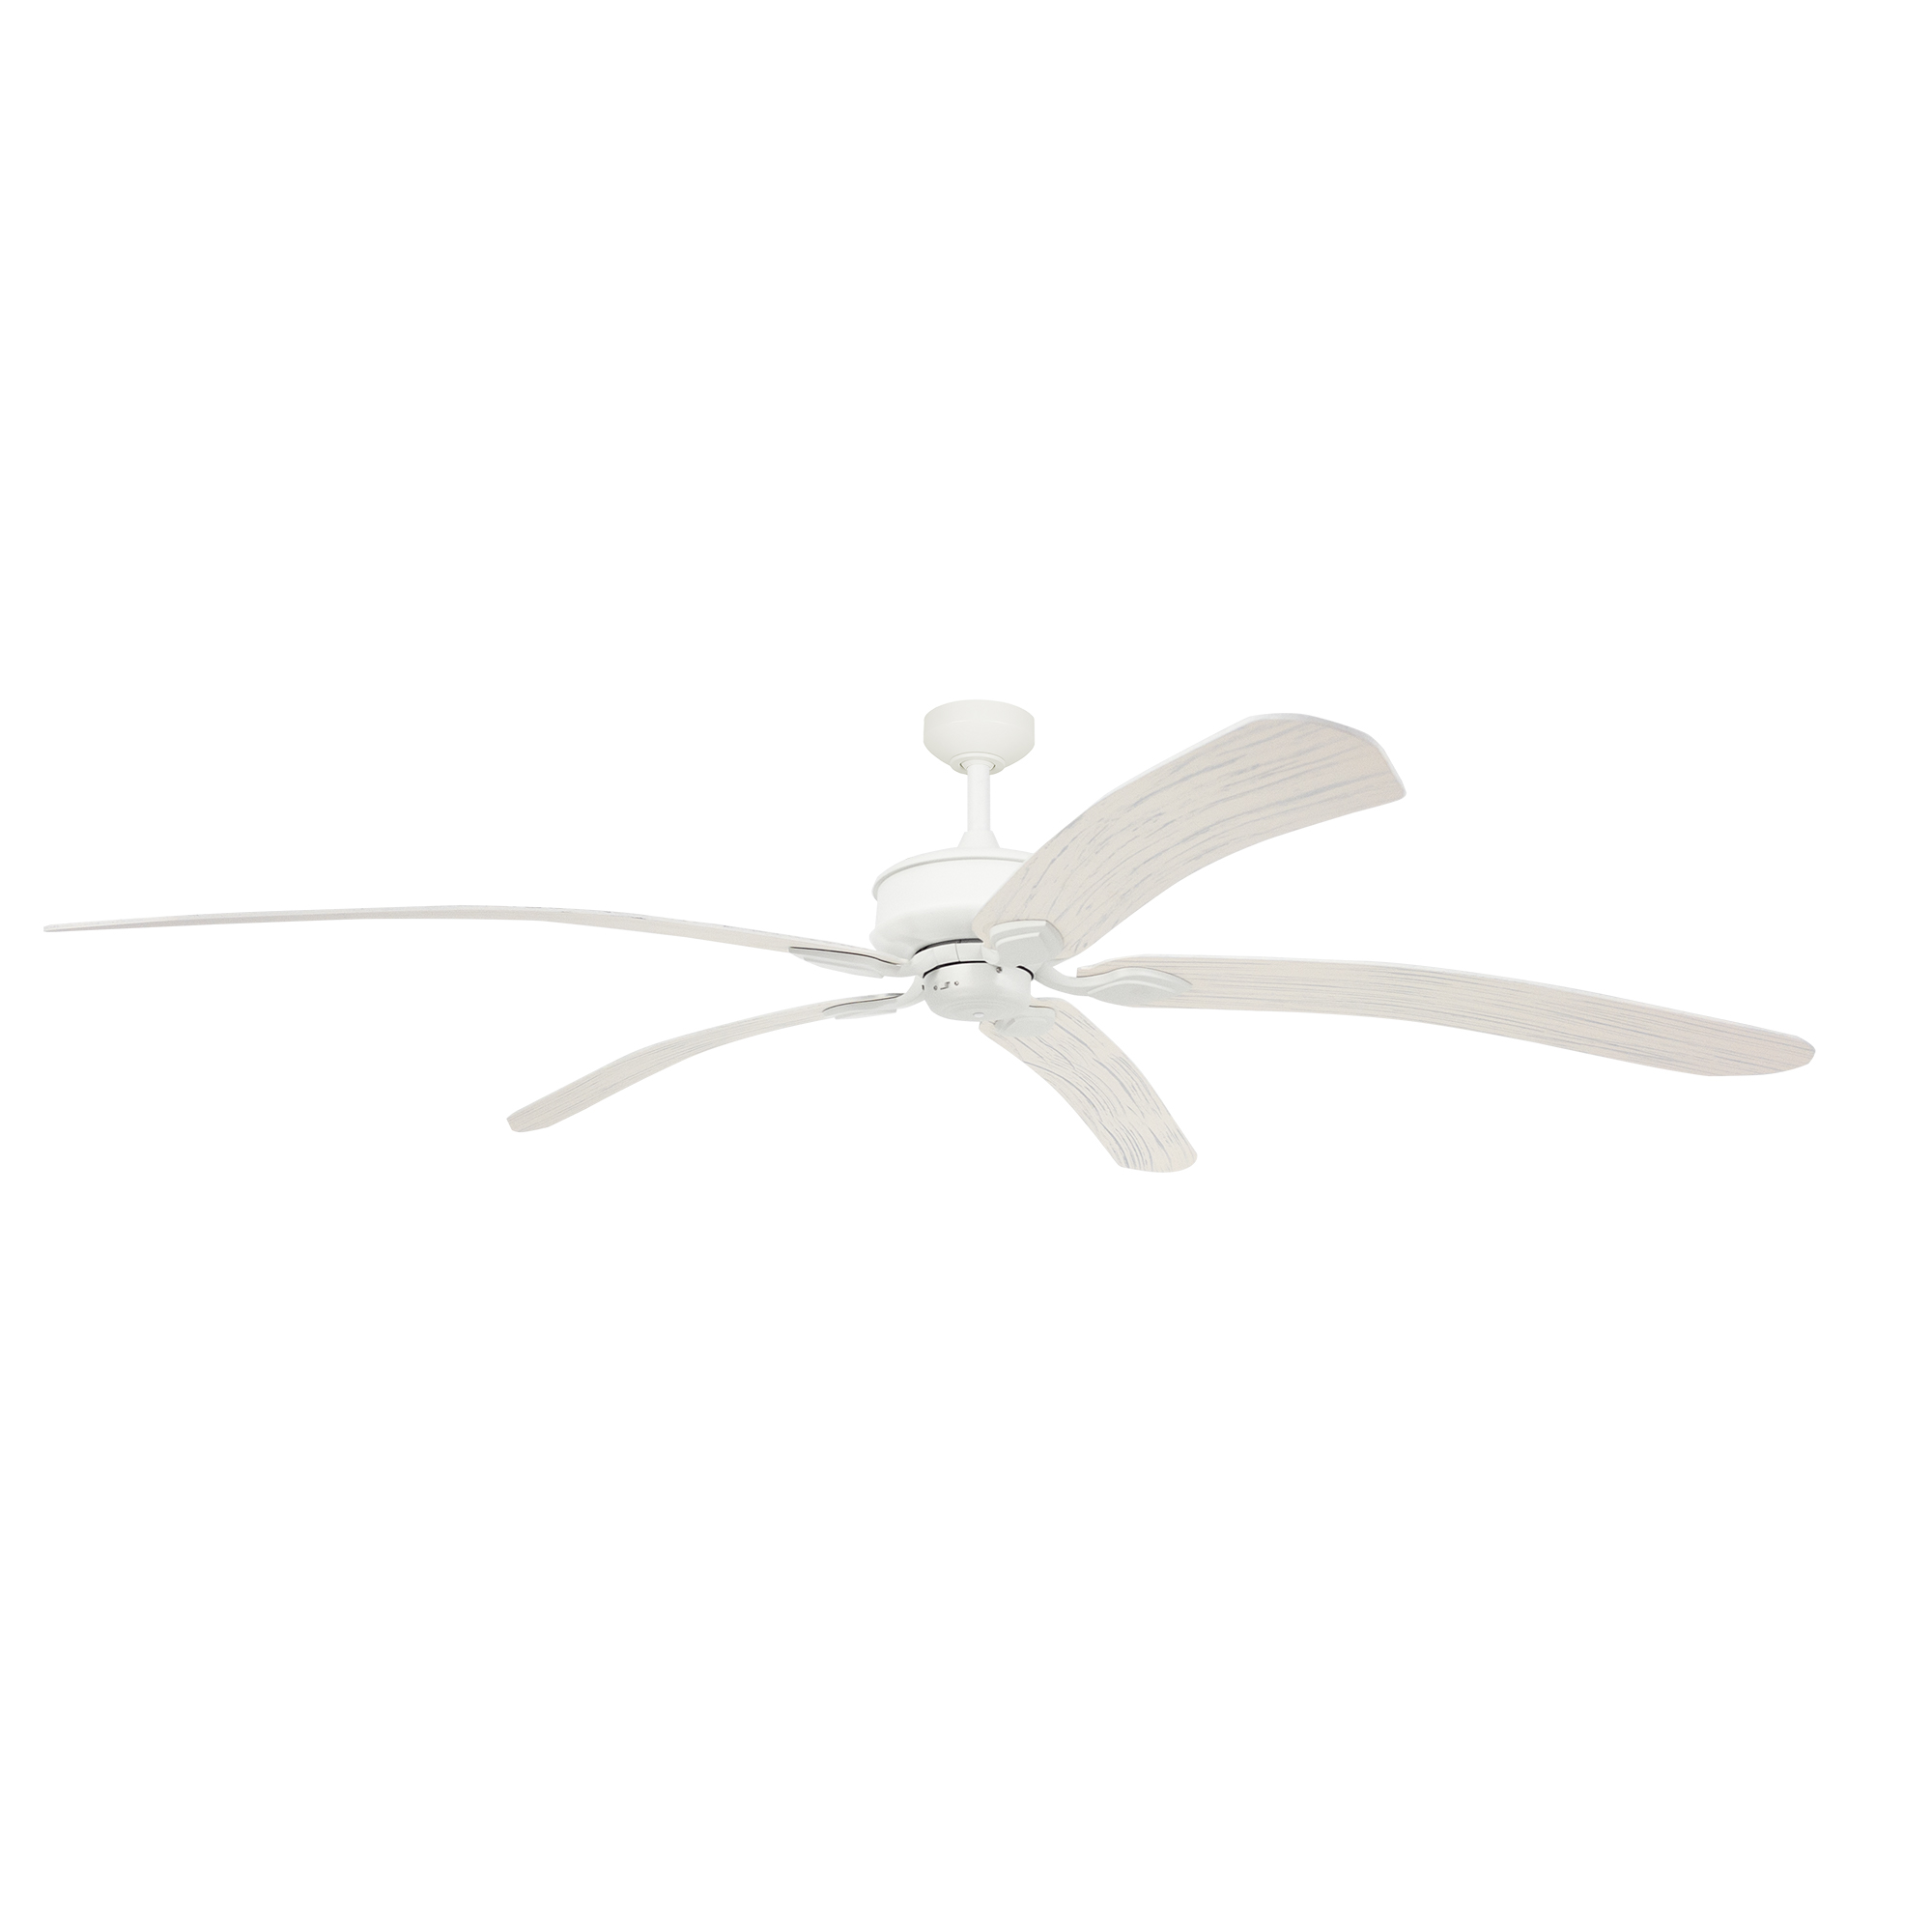 72" Tropicana Ceiling Fan in Matte White with White Wash blades